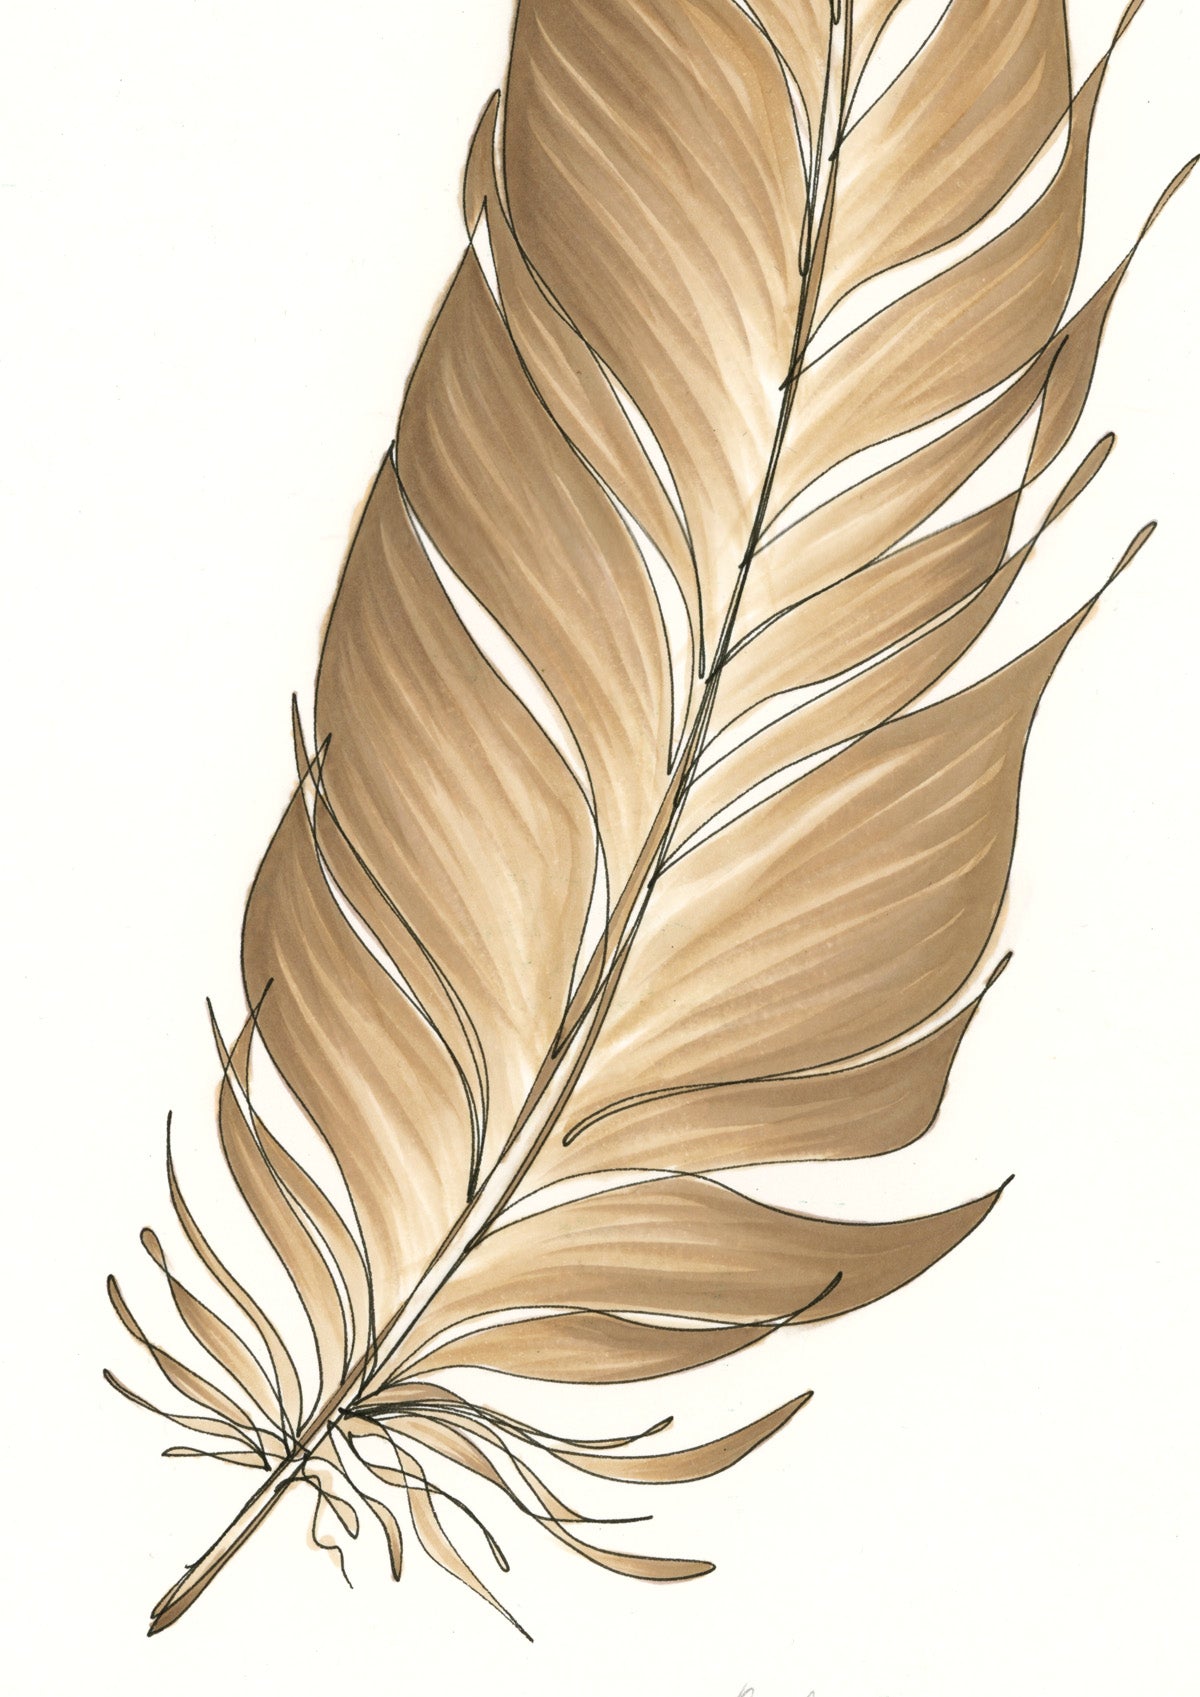 Feather Lines #8 - 12 x 16"